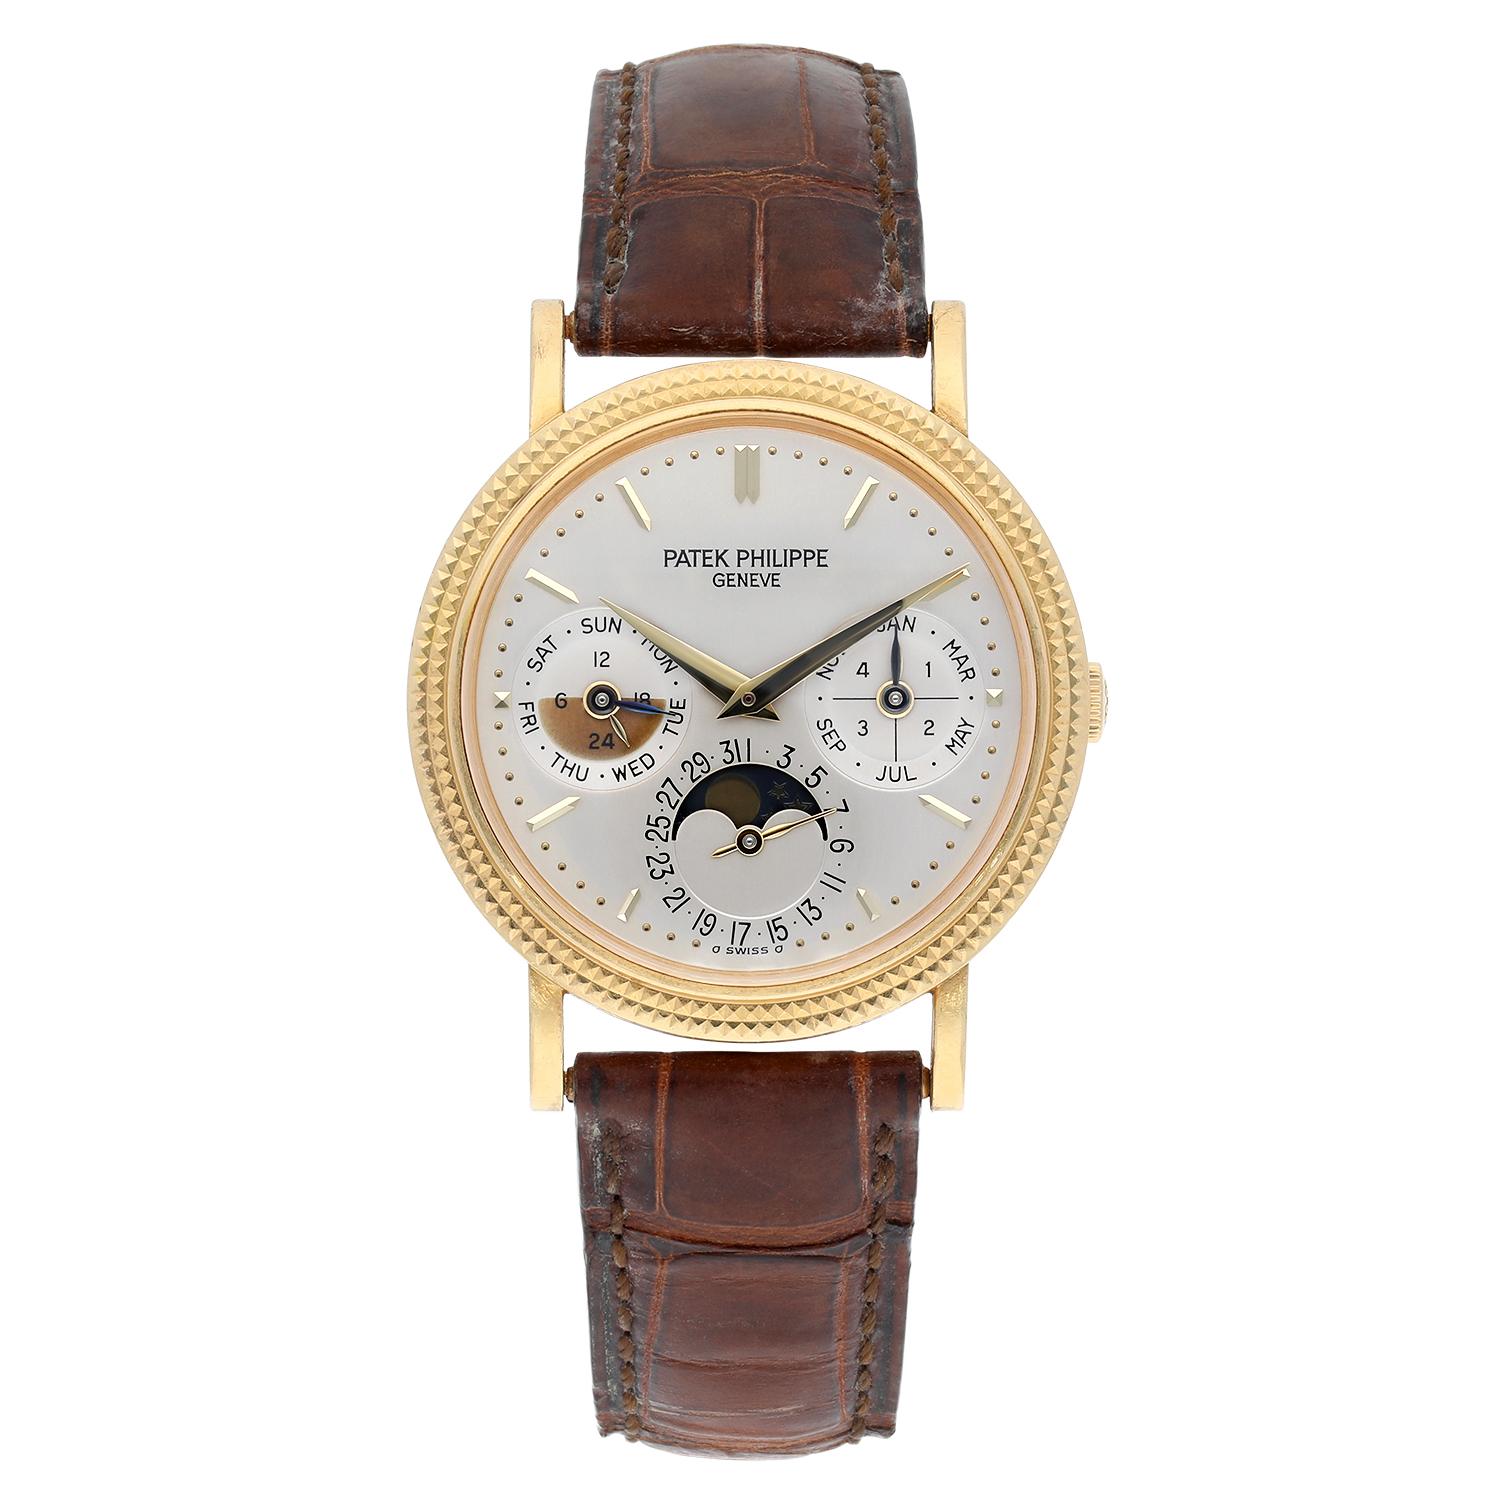 Preowned, excellent condition Patek Philippe reference 5039J-014 Perpetual Calendar Moonphase 18k Yellow Gold gents wristwatch. Argent dial, baton hour markers, month and leap year indicator at 3 o'clock, date and moonphase display at 6 o'clock, day